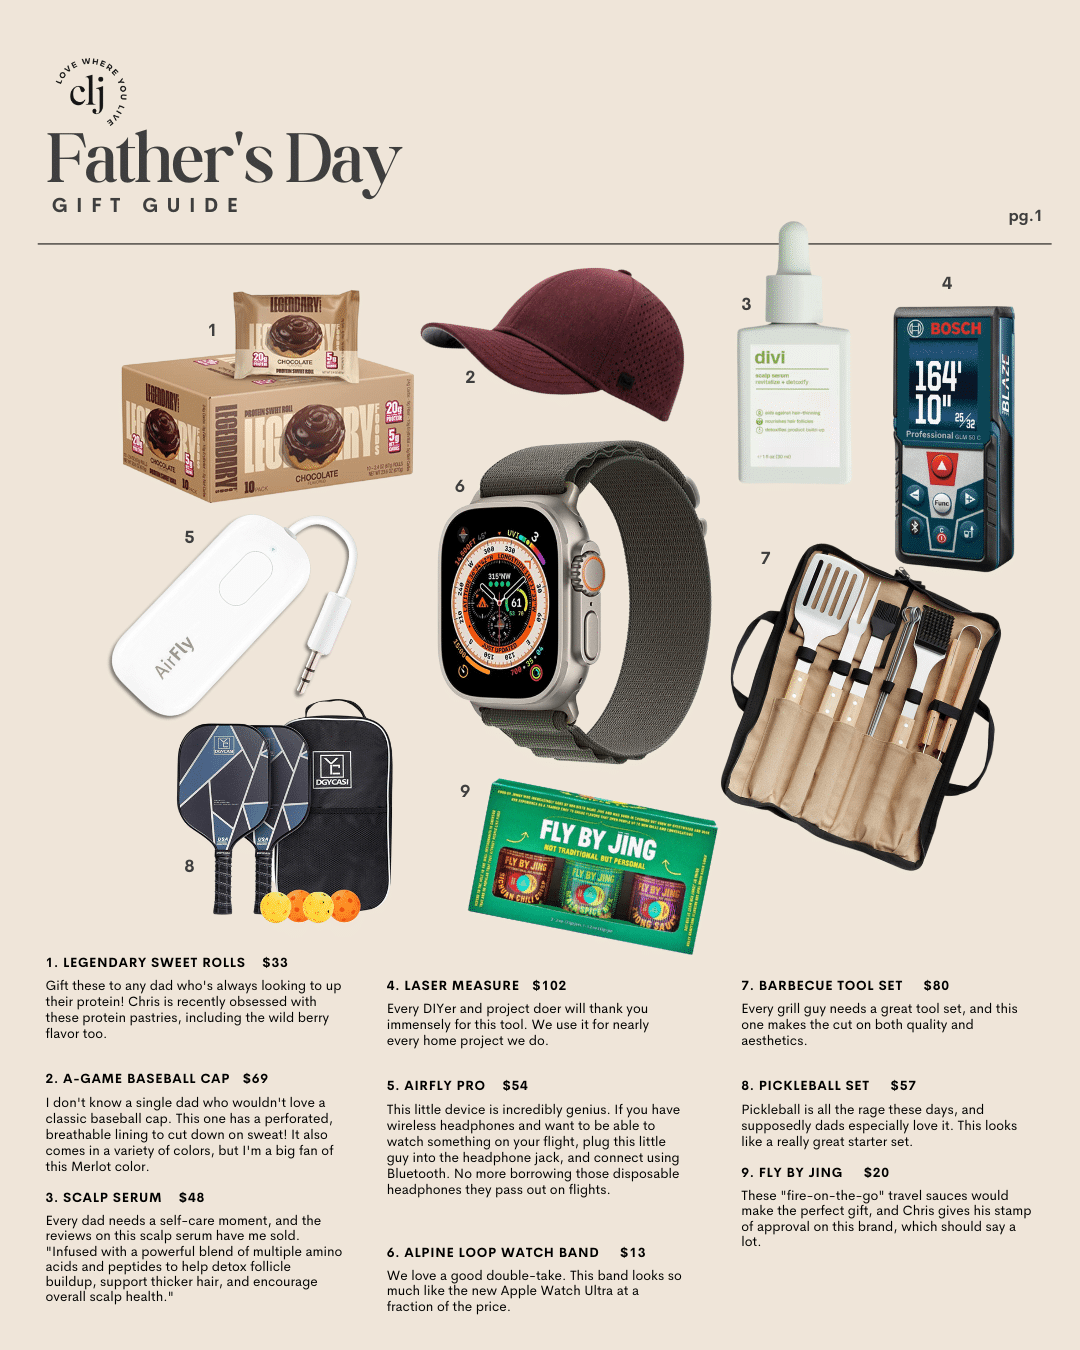 Father's Day Gift Guide for Well-Groomed Gentleman